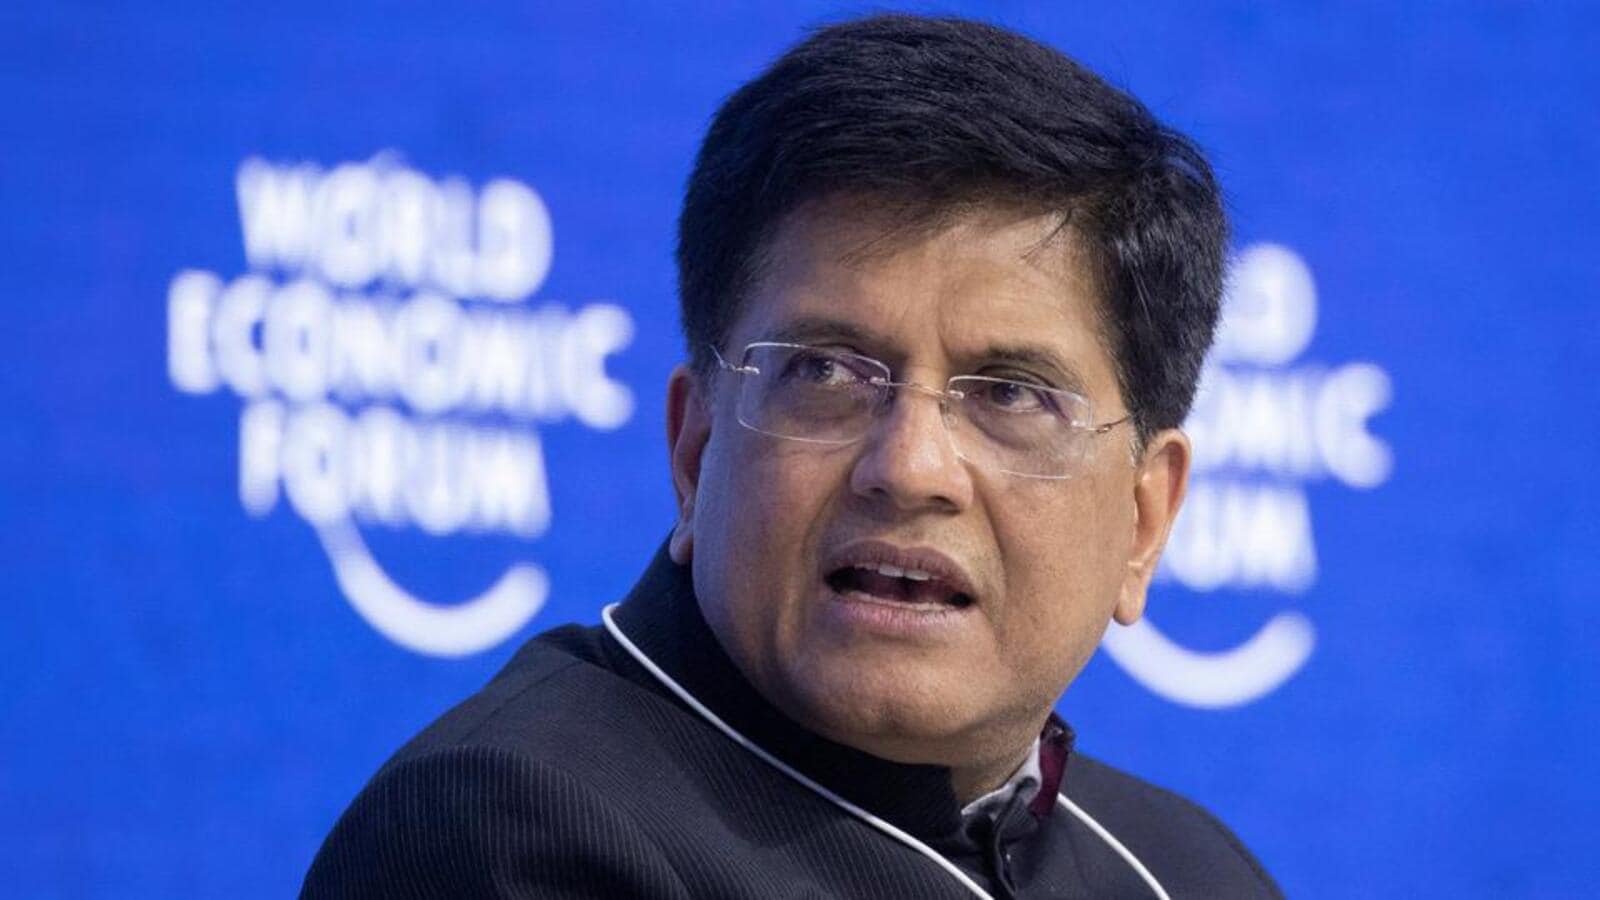 Govt committed to protect kirana stores from large-format e-tailers: Piyush Goyal